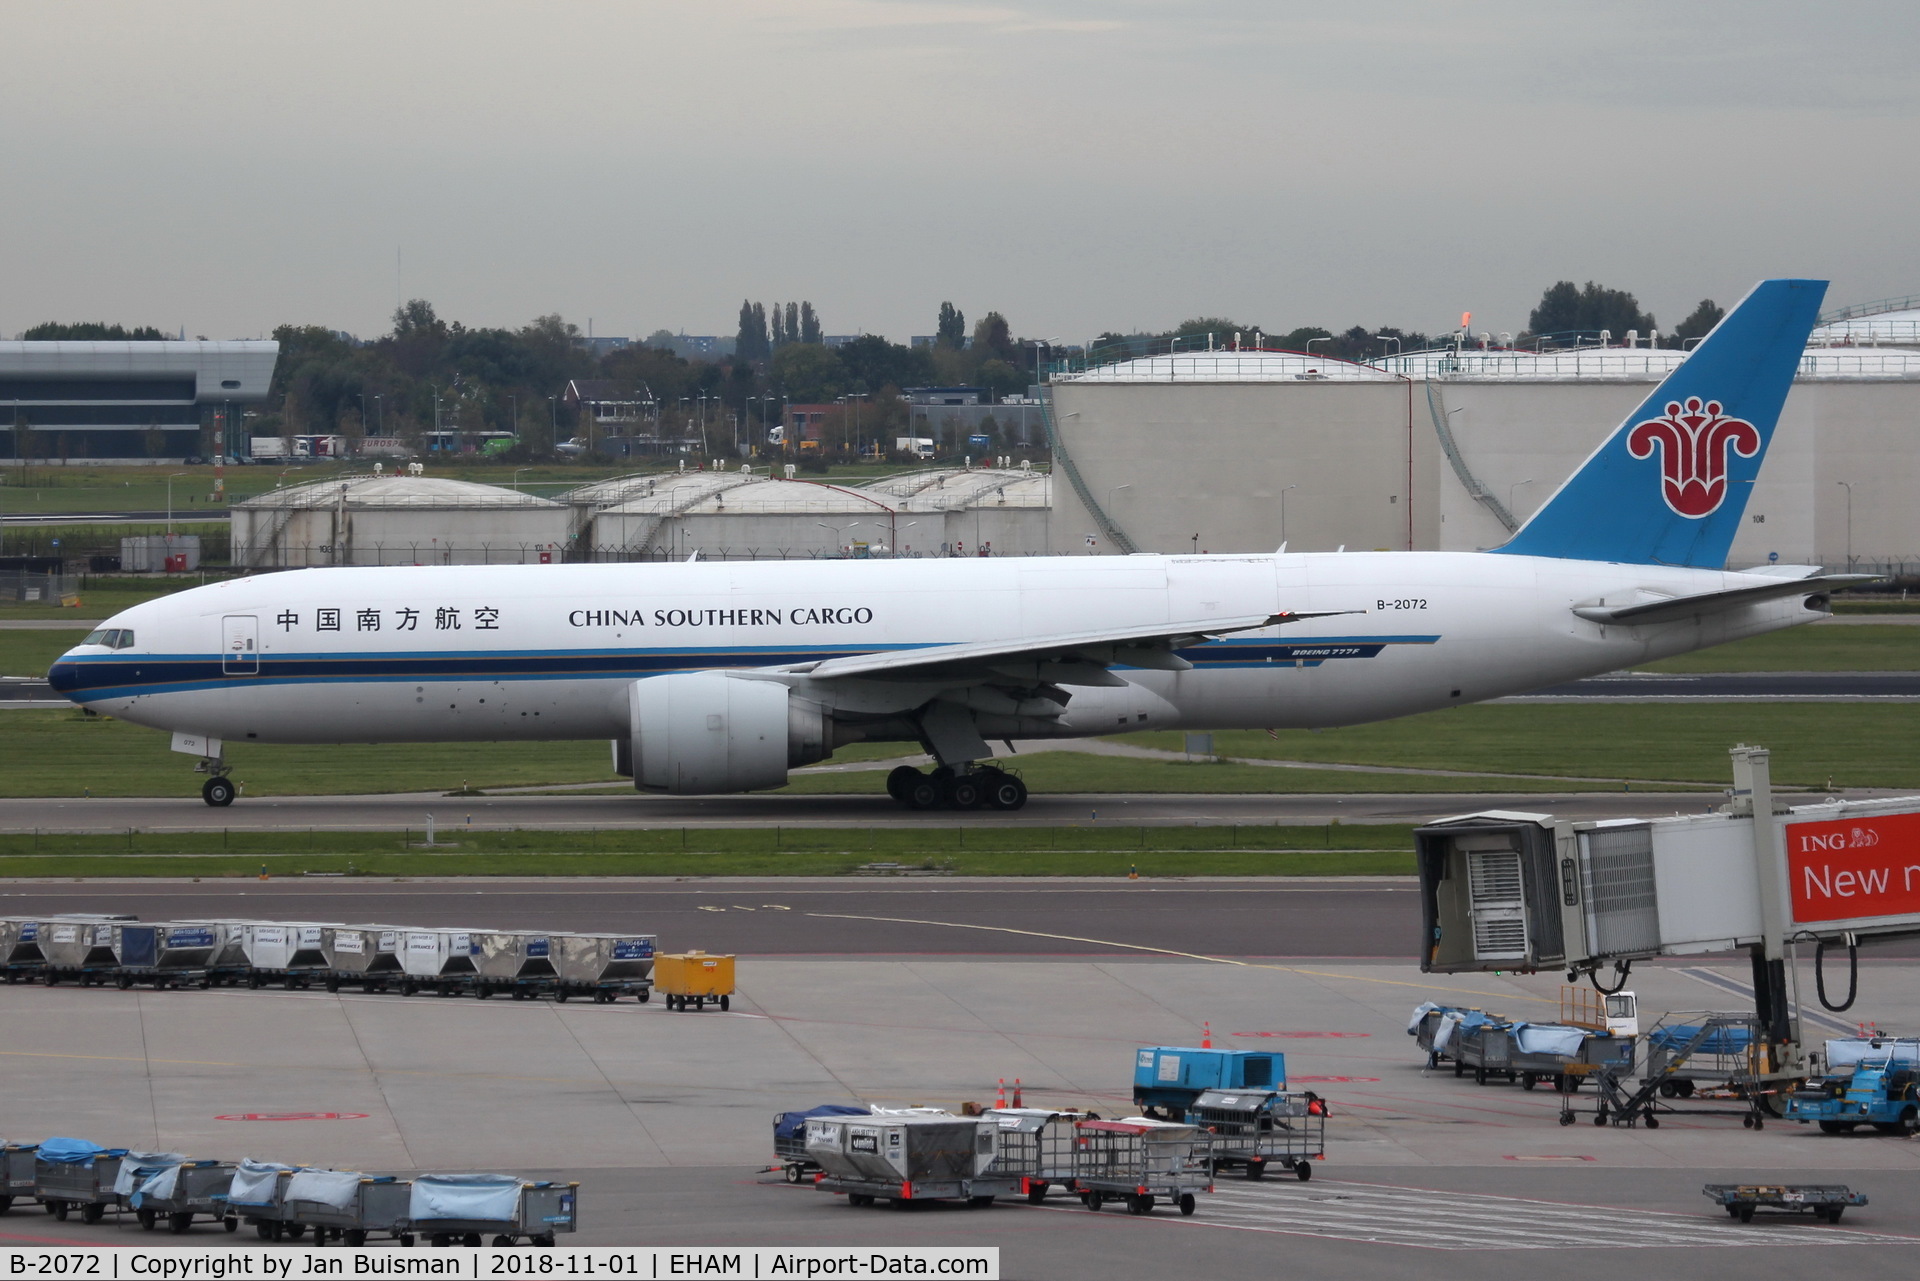 B-2072, 2009 Boeing 777-F1B C/N 37310, China Southern Airlines Cargo